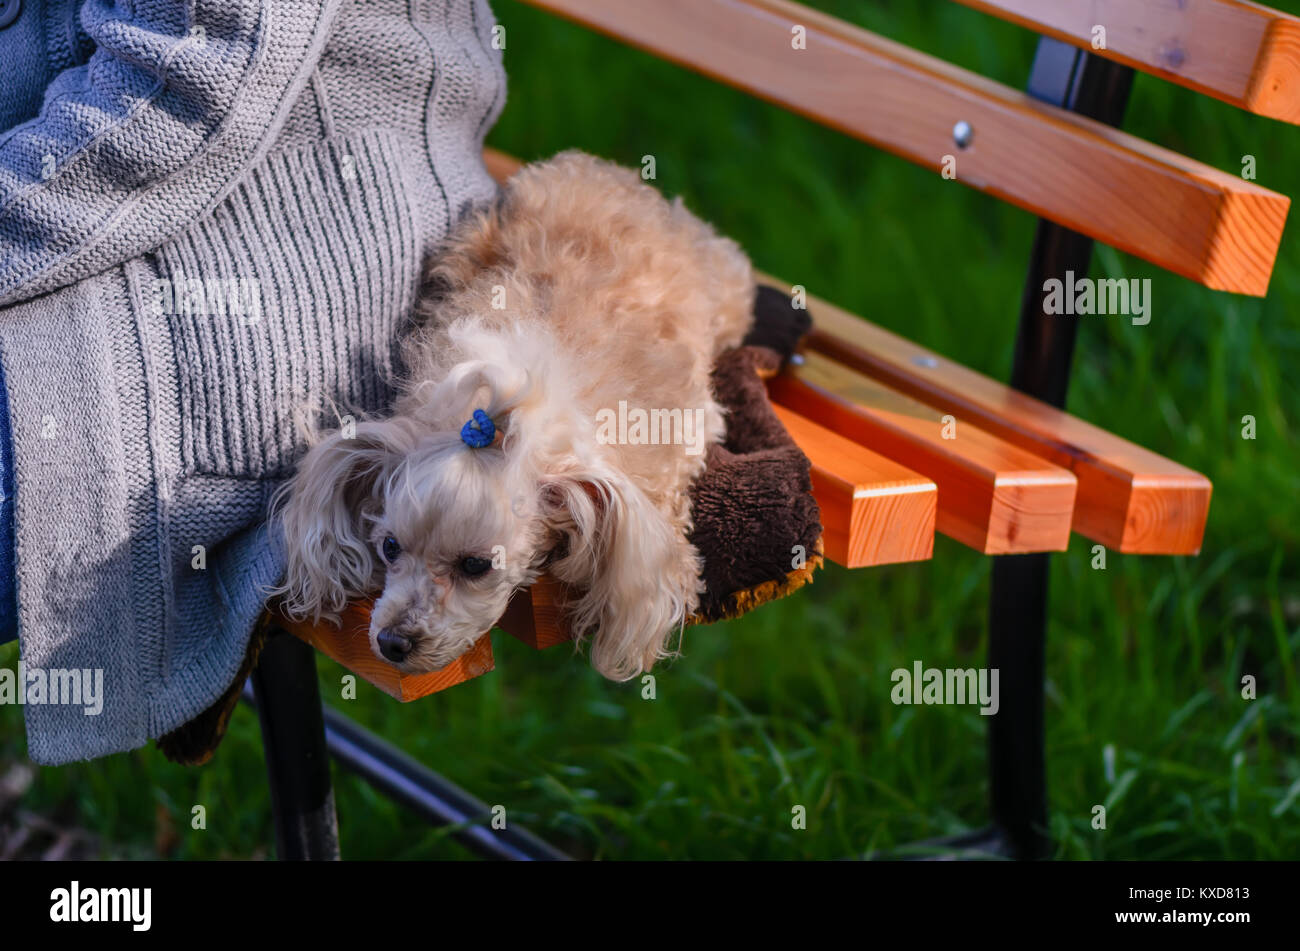 An animal, a dog, a white, shaggy lap dog lies on a wooden bench near the hostess in a gray knitted sweater Stock Photo